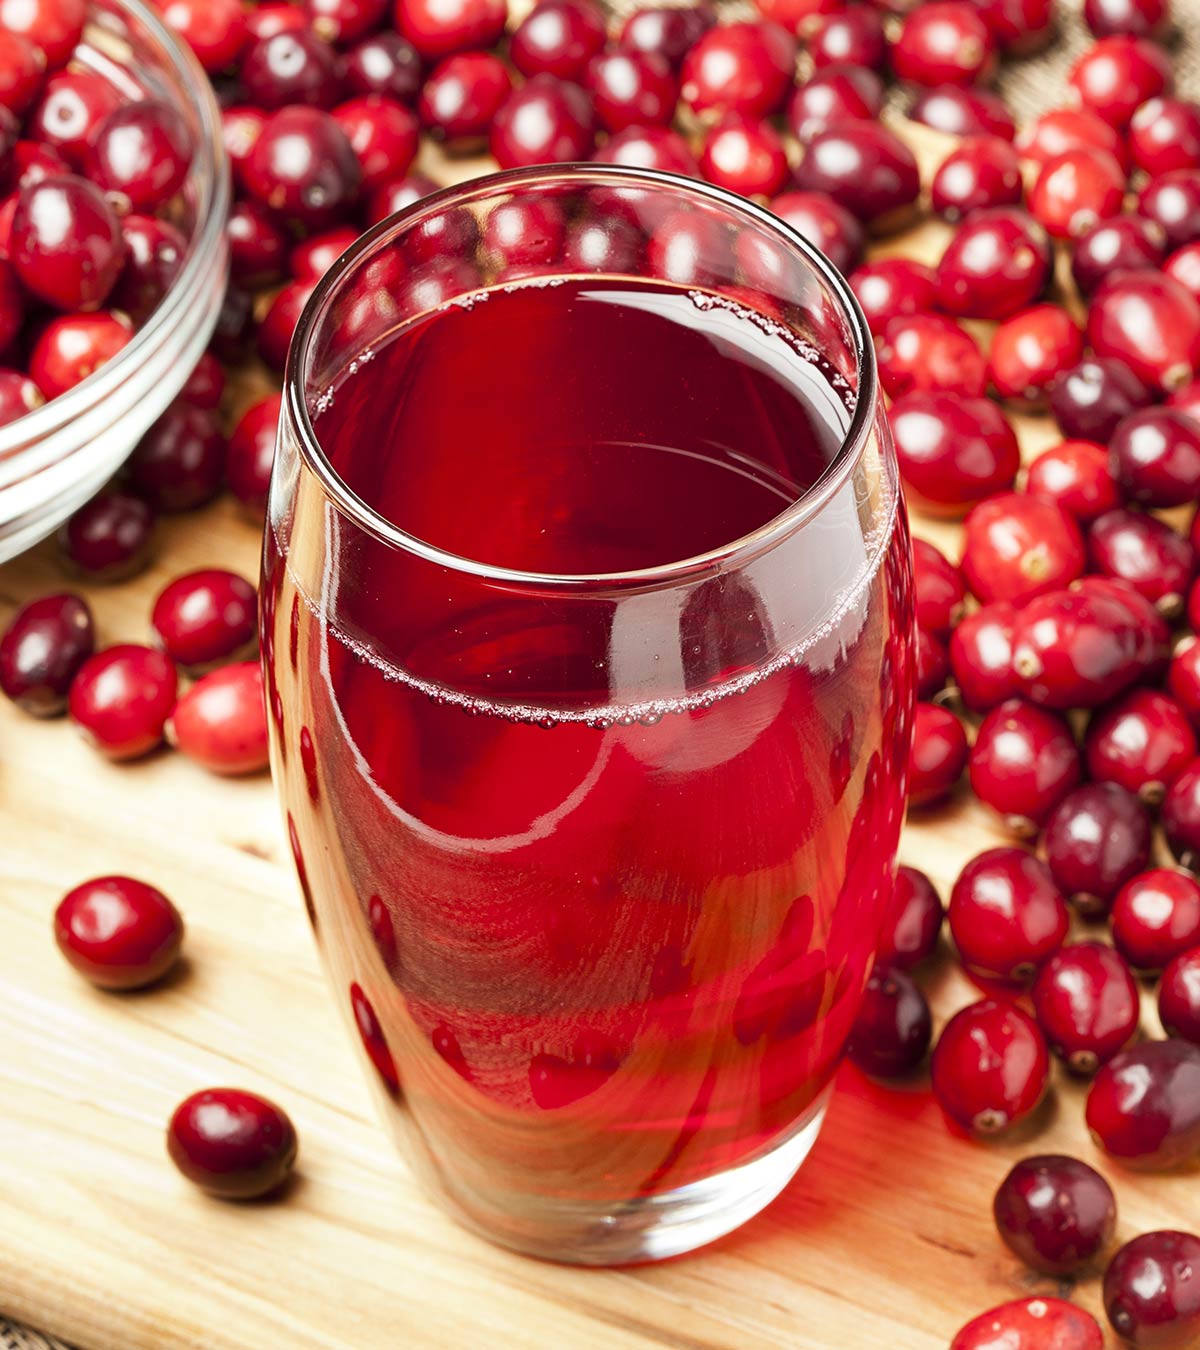 Is It Safe To Drink Cranberry Juice During Pregnancy?